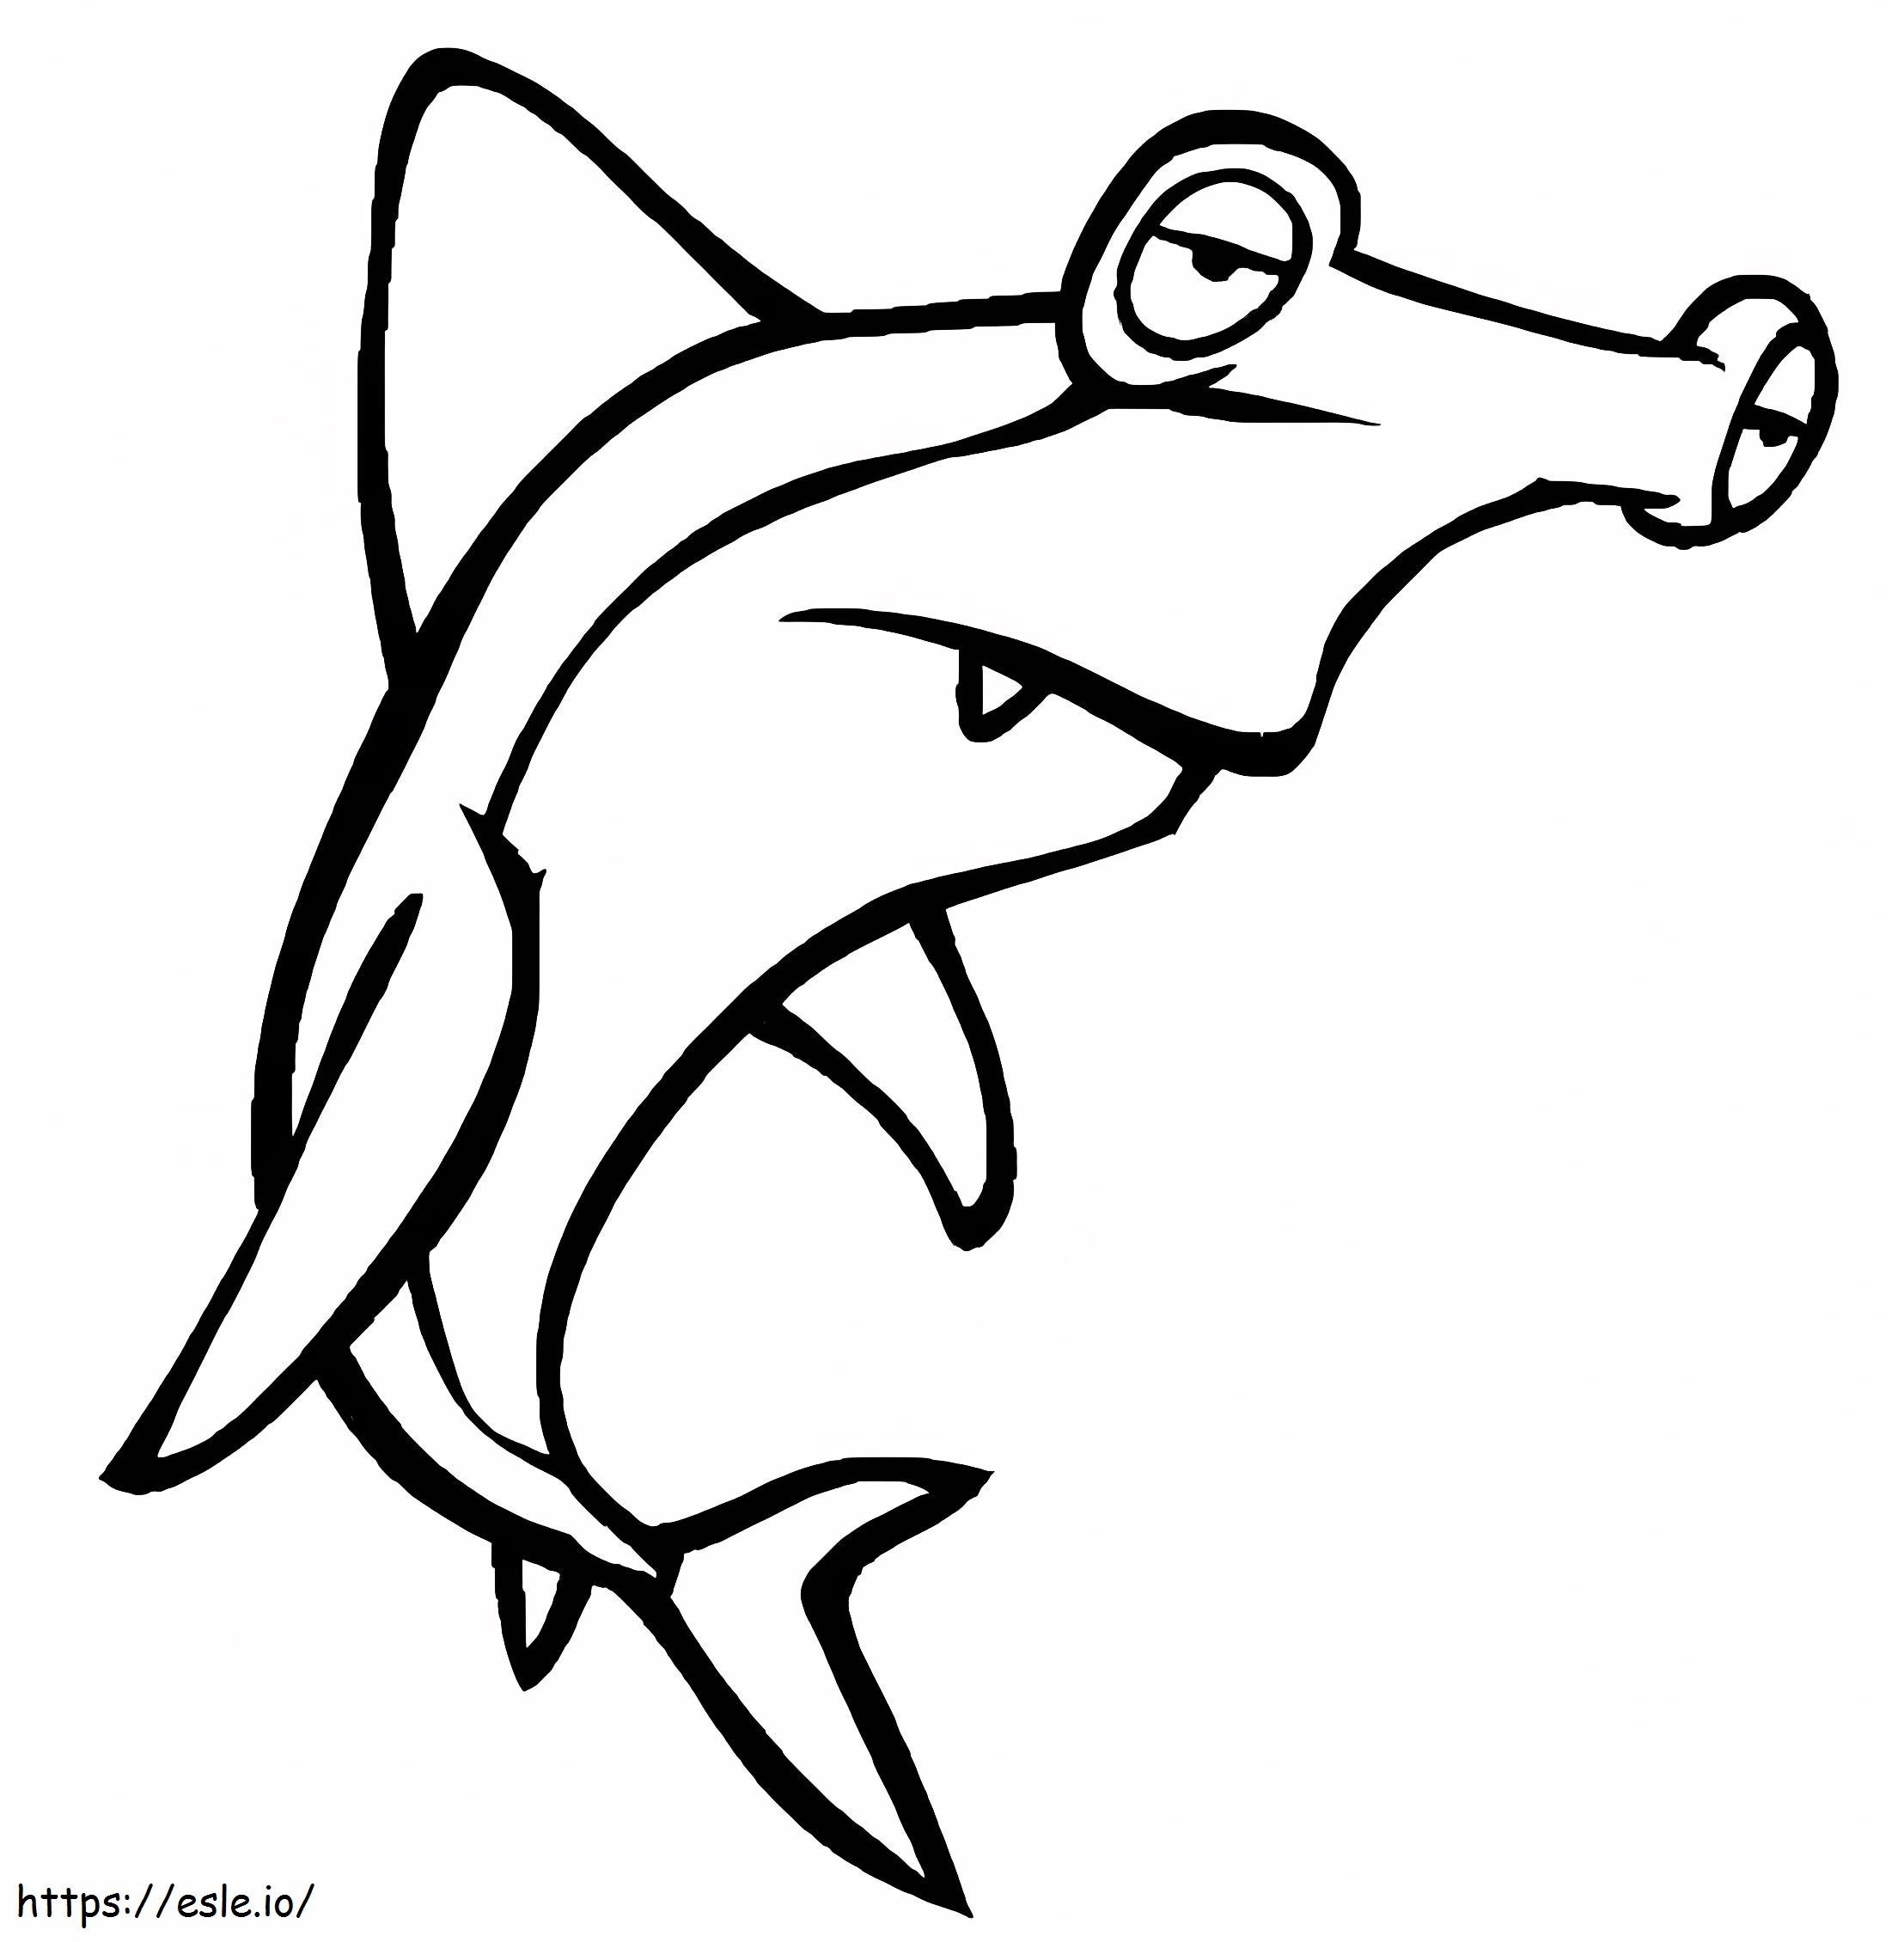 Tired Hammerhead Shark coloring page